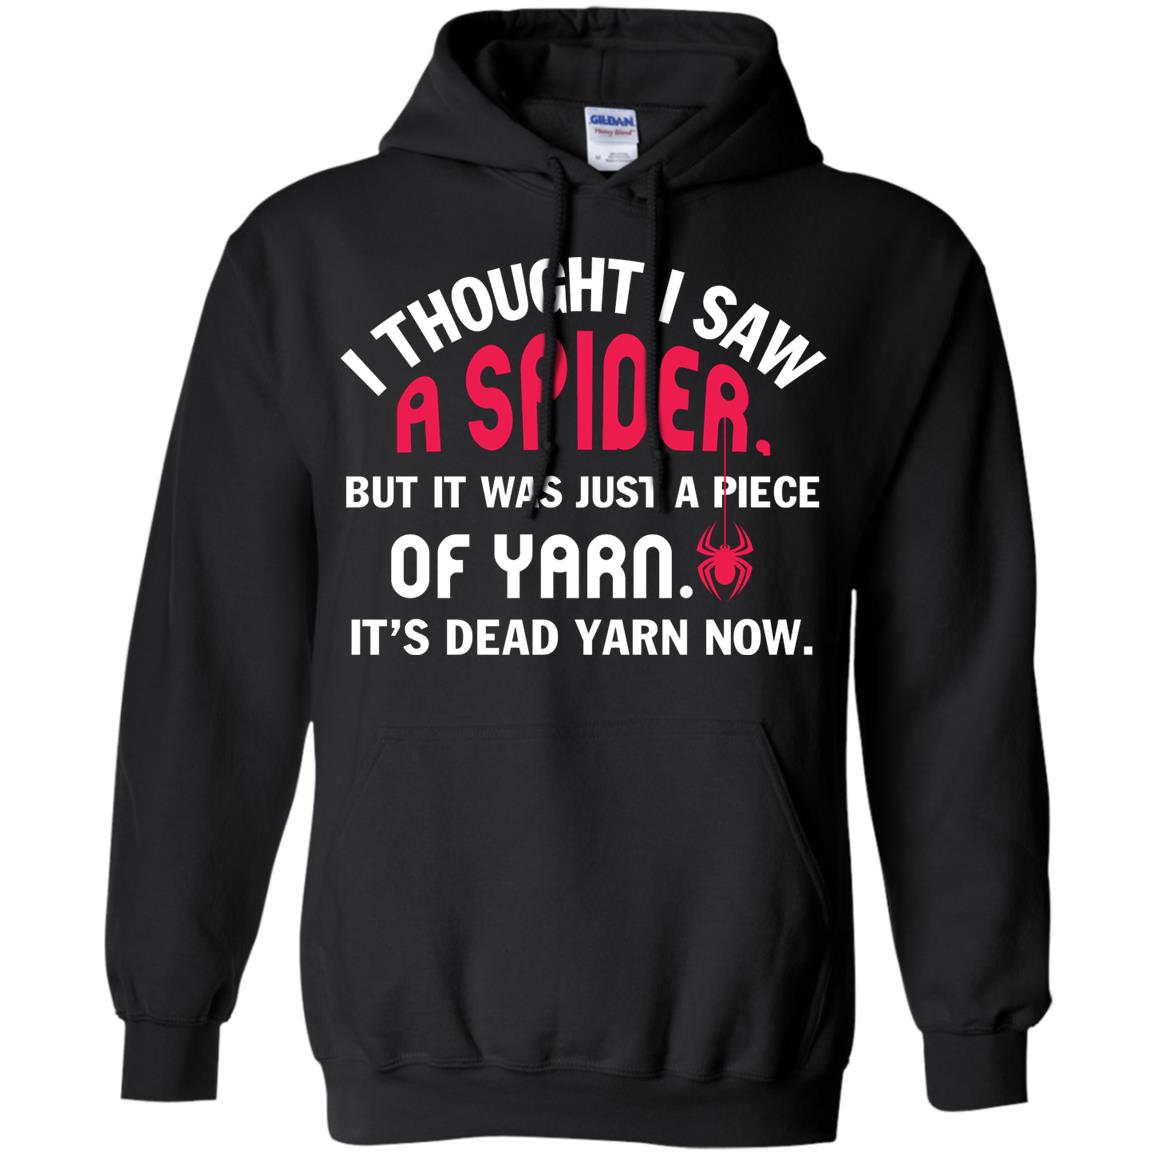 I Thought I Saw A Spider But It Was Just A Piece Of Yarn It’s Dead Yarn Now Funny Spider T-shirtG185 Gildan Pullover Hoodie 8 oz.